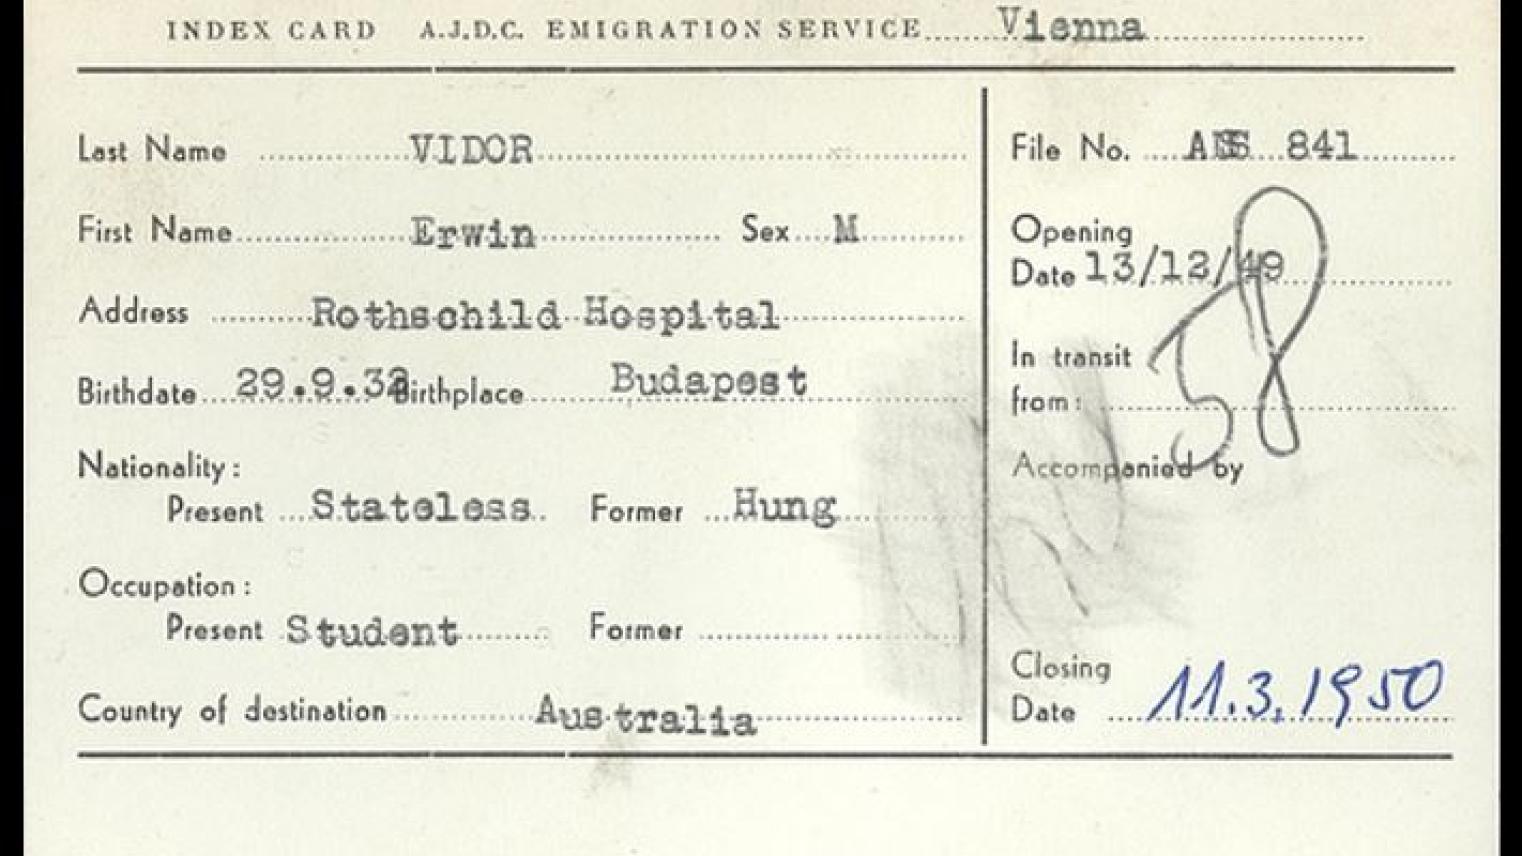 Public domain image of American Jewish Joint Distribution Committee (JDC) index card for a stateless person destined for Australia following the Second World War from https://commons.wikimedia.org/wiki/File:DP-Vienna.jpg.